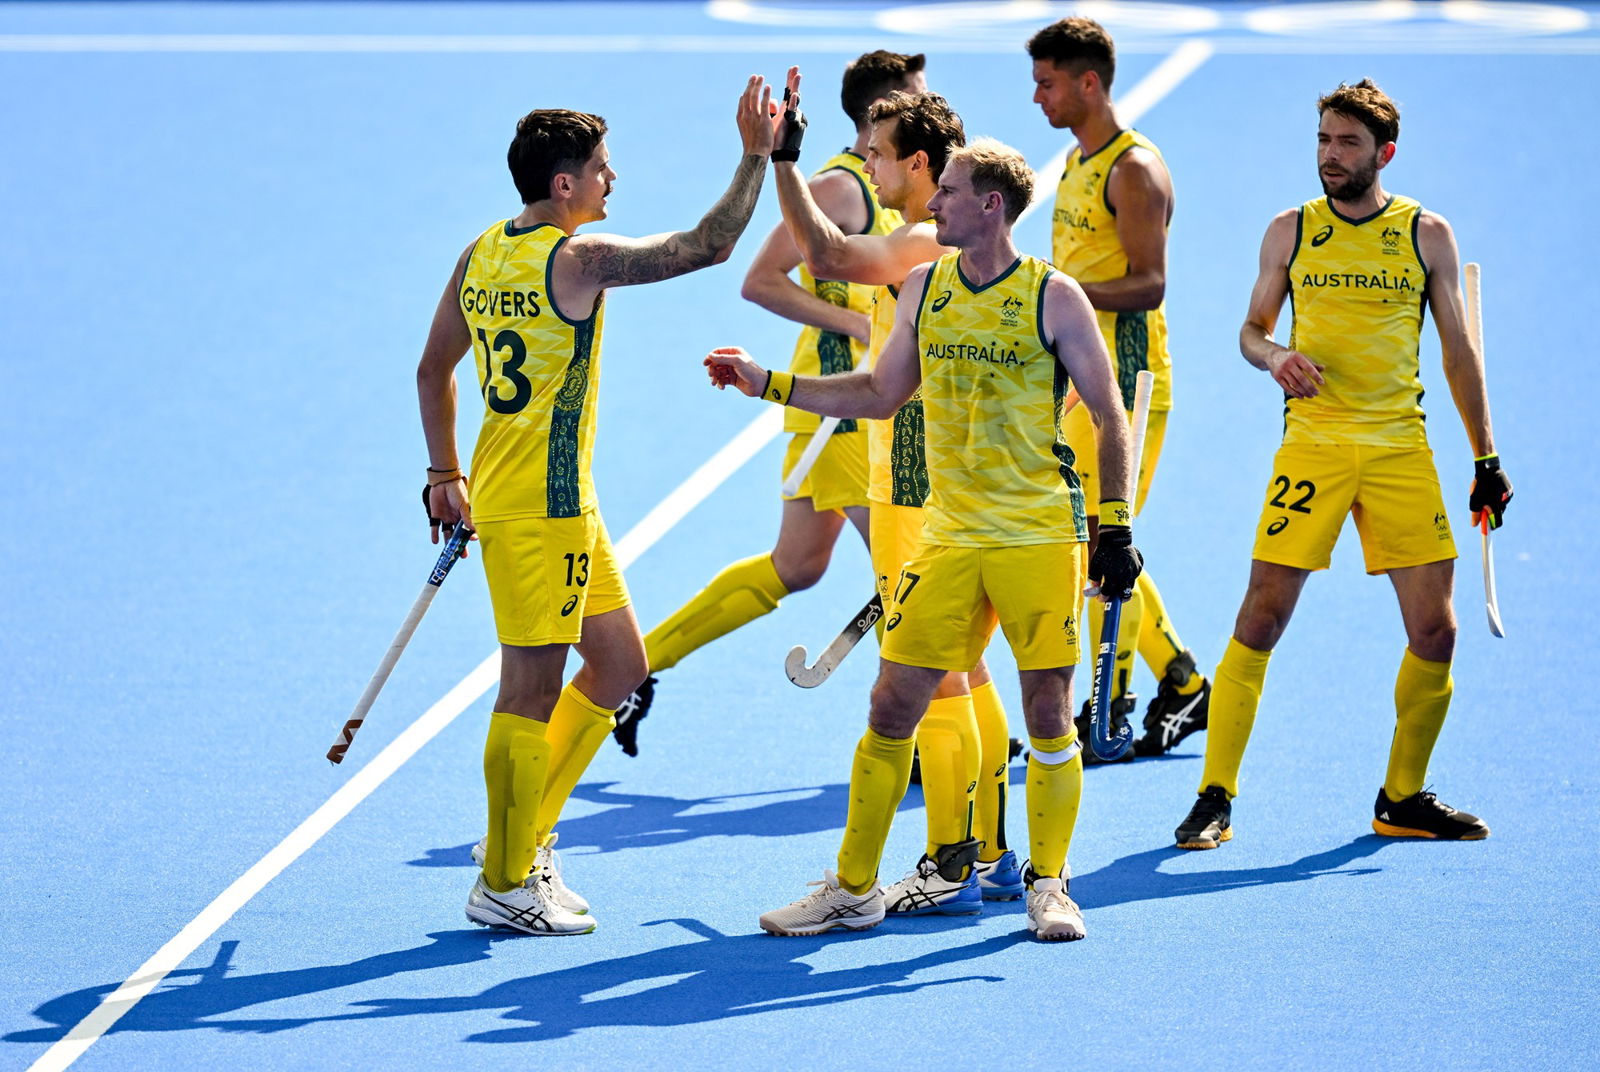 A group of Australian hockey players wearing gold and green uniforms celebrate.